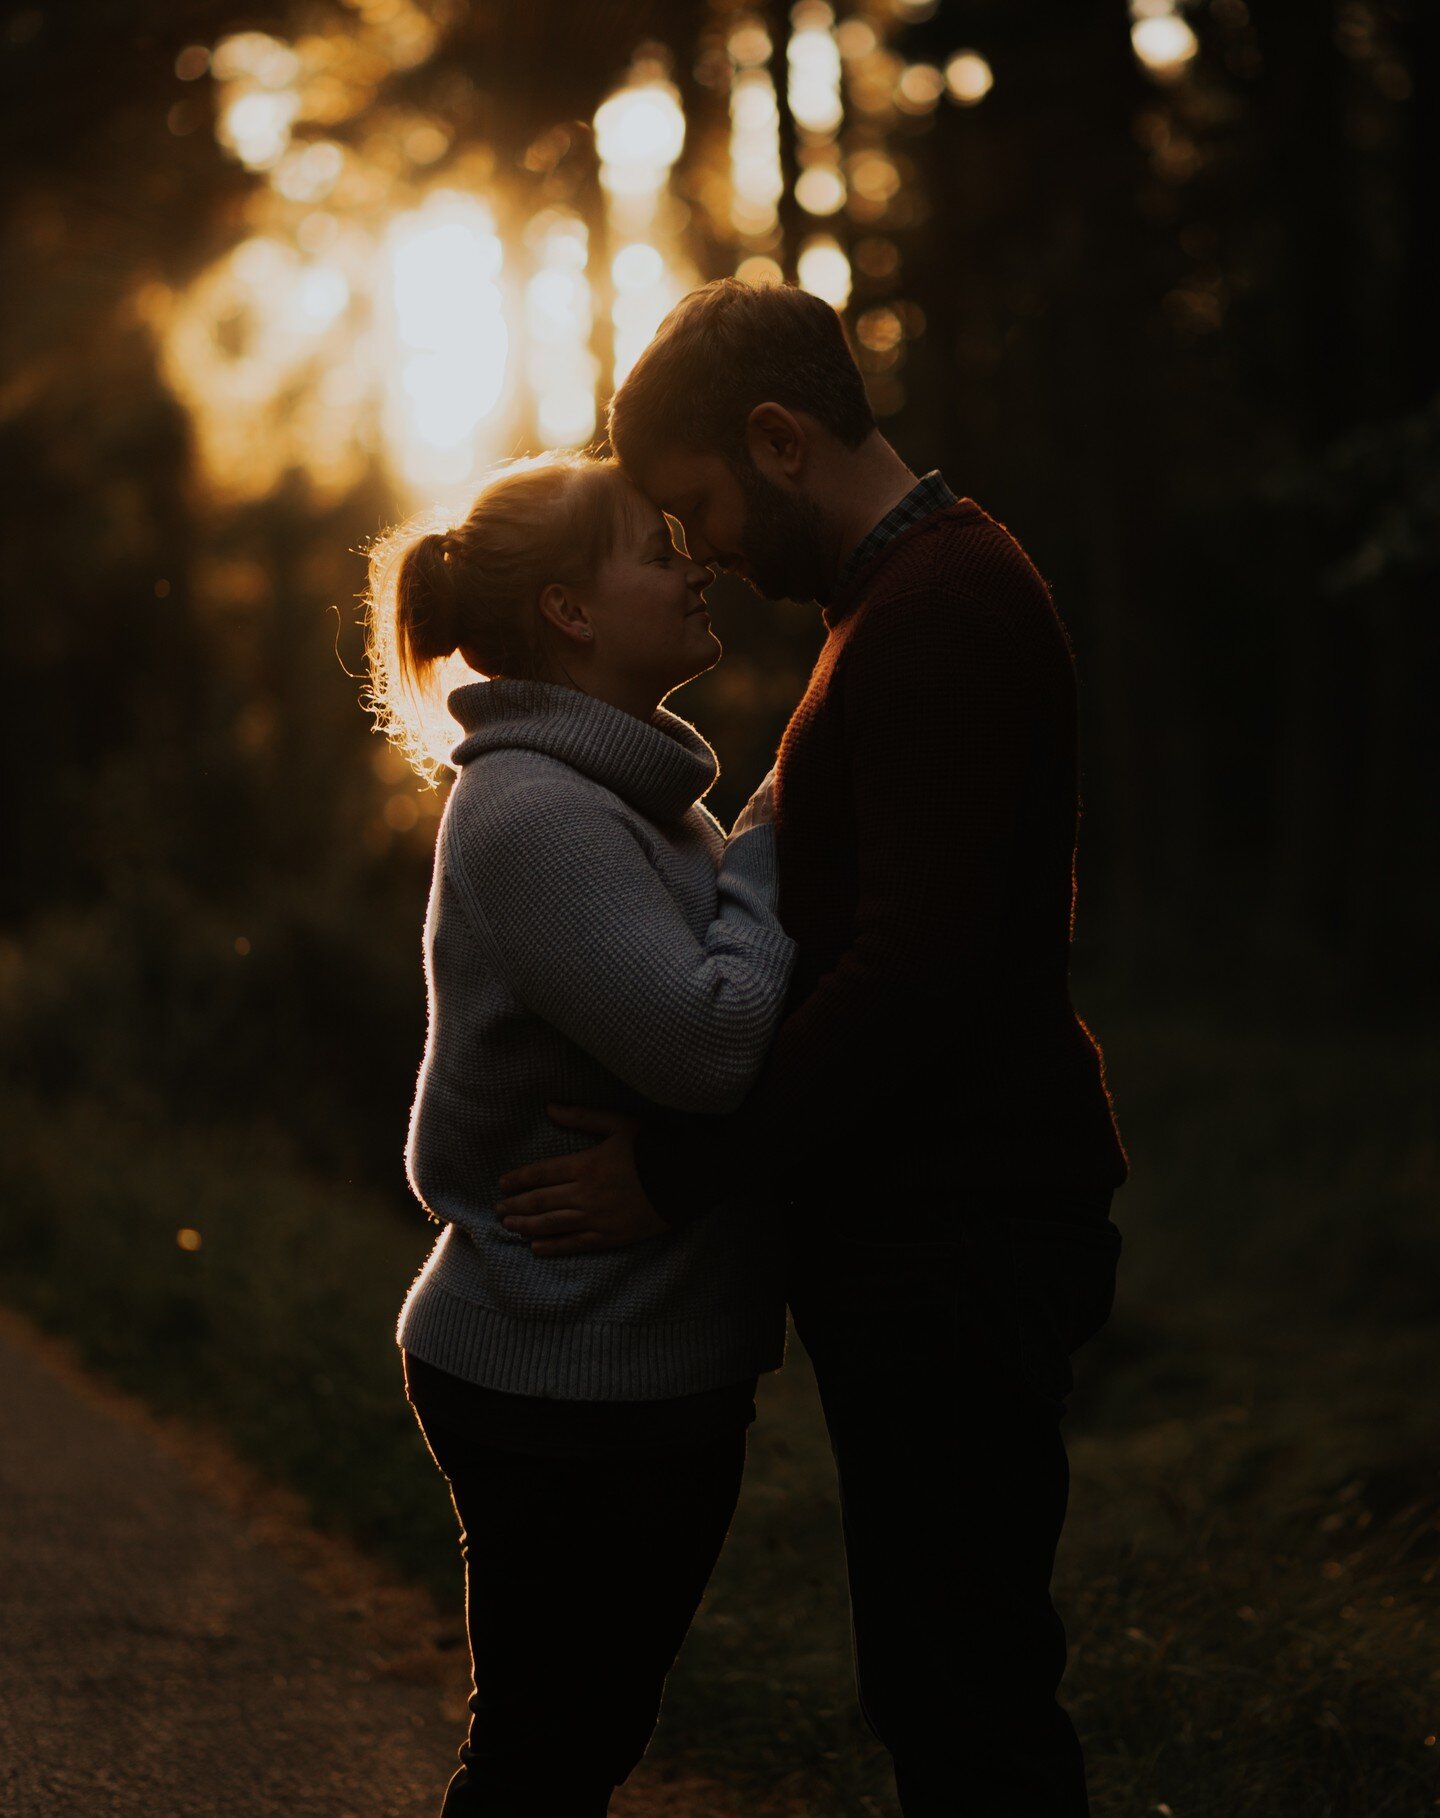 || NATASHA + SAM || What a treat it was to run around like we were on supermarket sweep. I'd love to take credit for this remarkable sunset, but was the doing of mother nature. They both made it so easy to make beautiful images. Cannot wait to shoot 